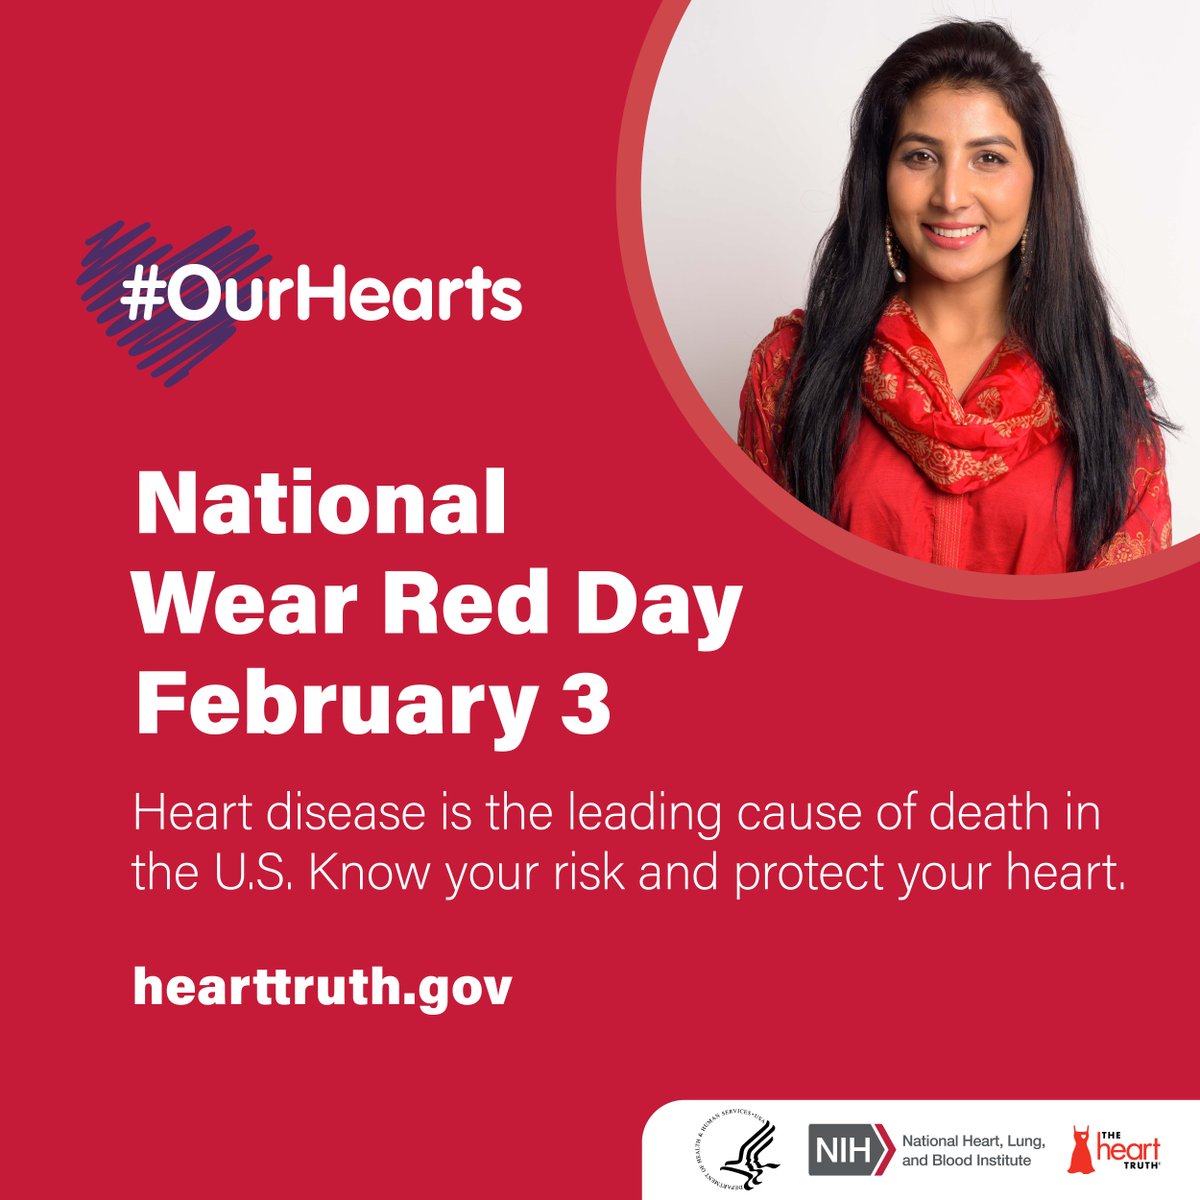 On February 3, we’re joining TheHeartTruth in commemorating National 